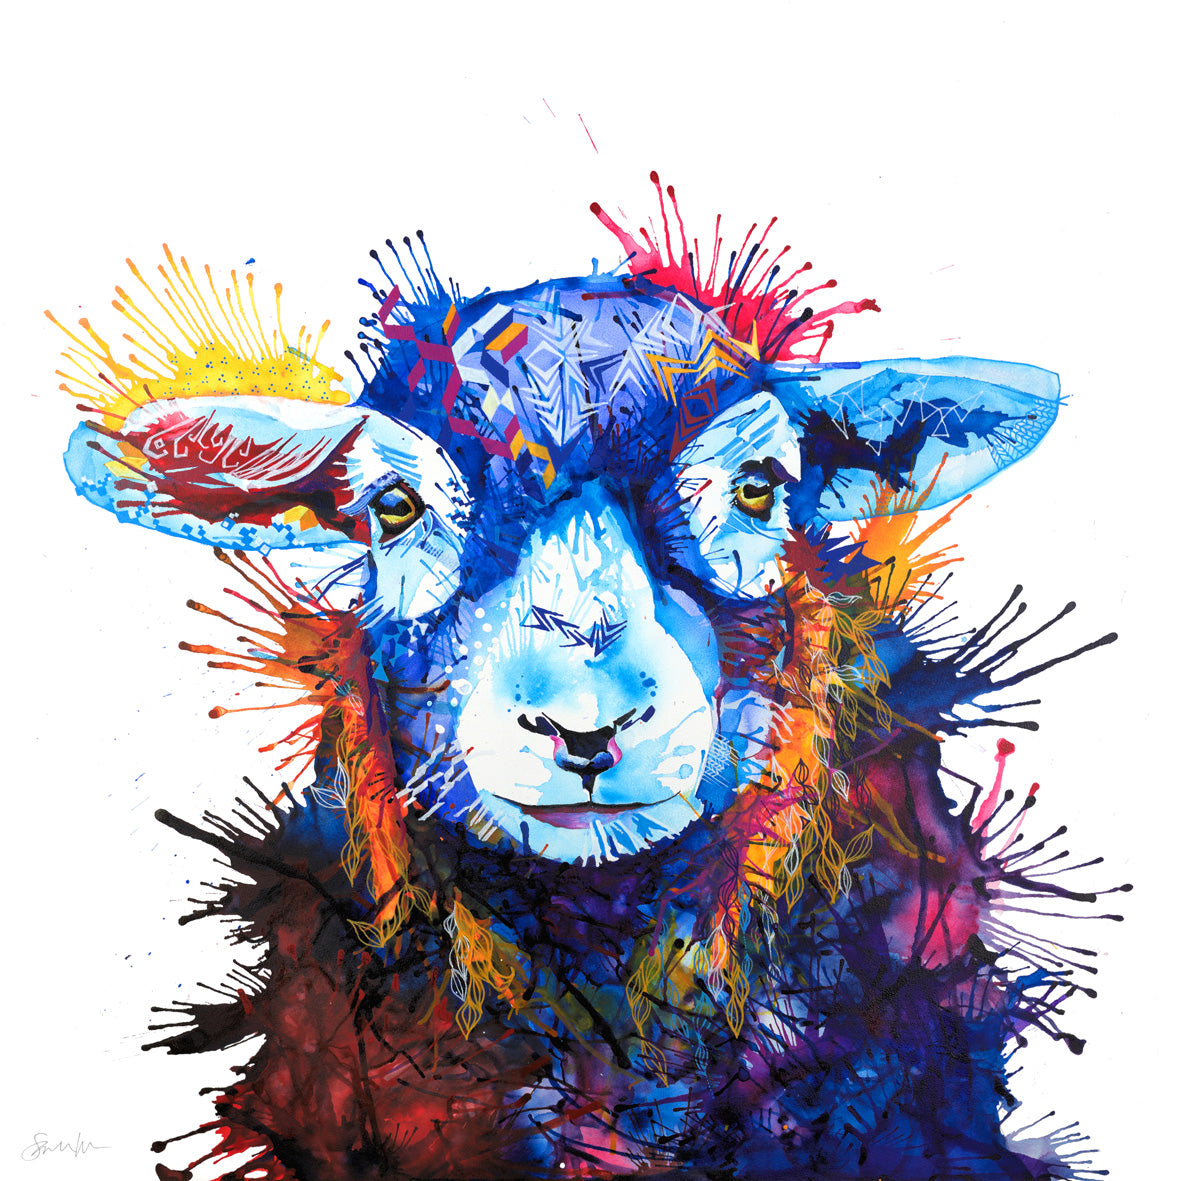 Florence the Sheep Canvas